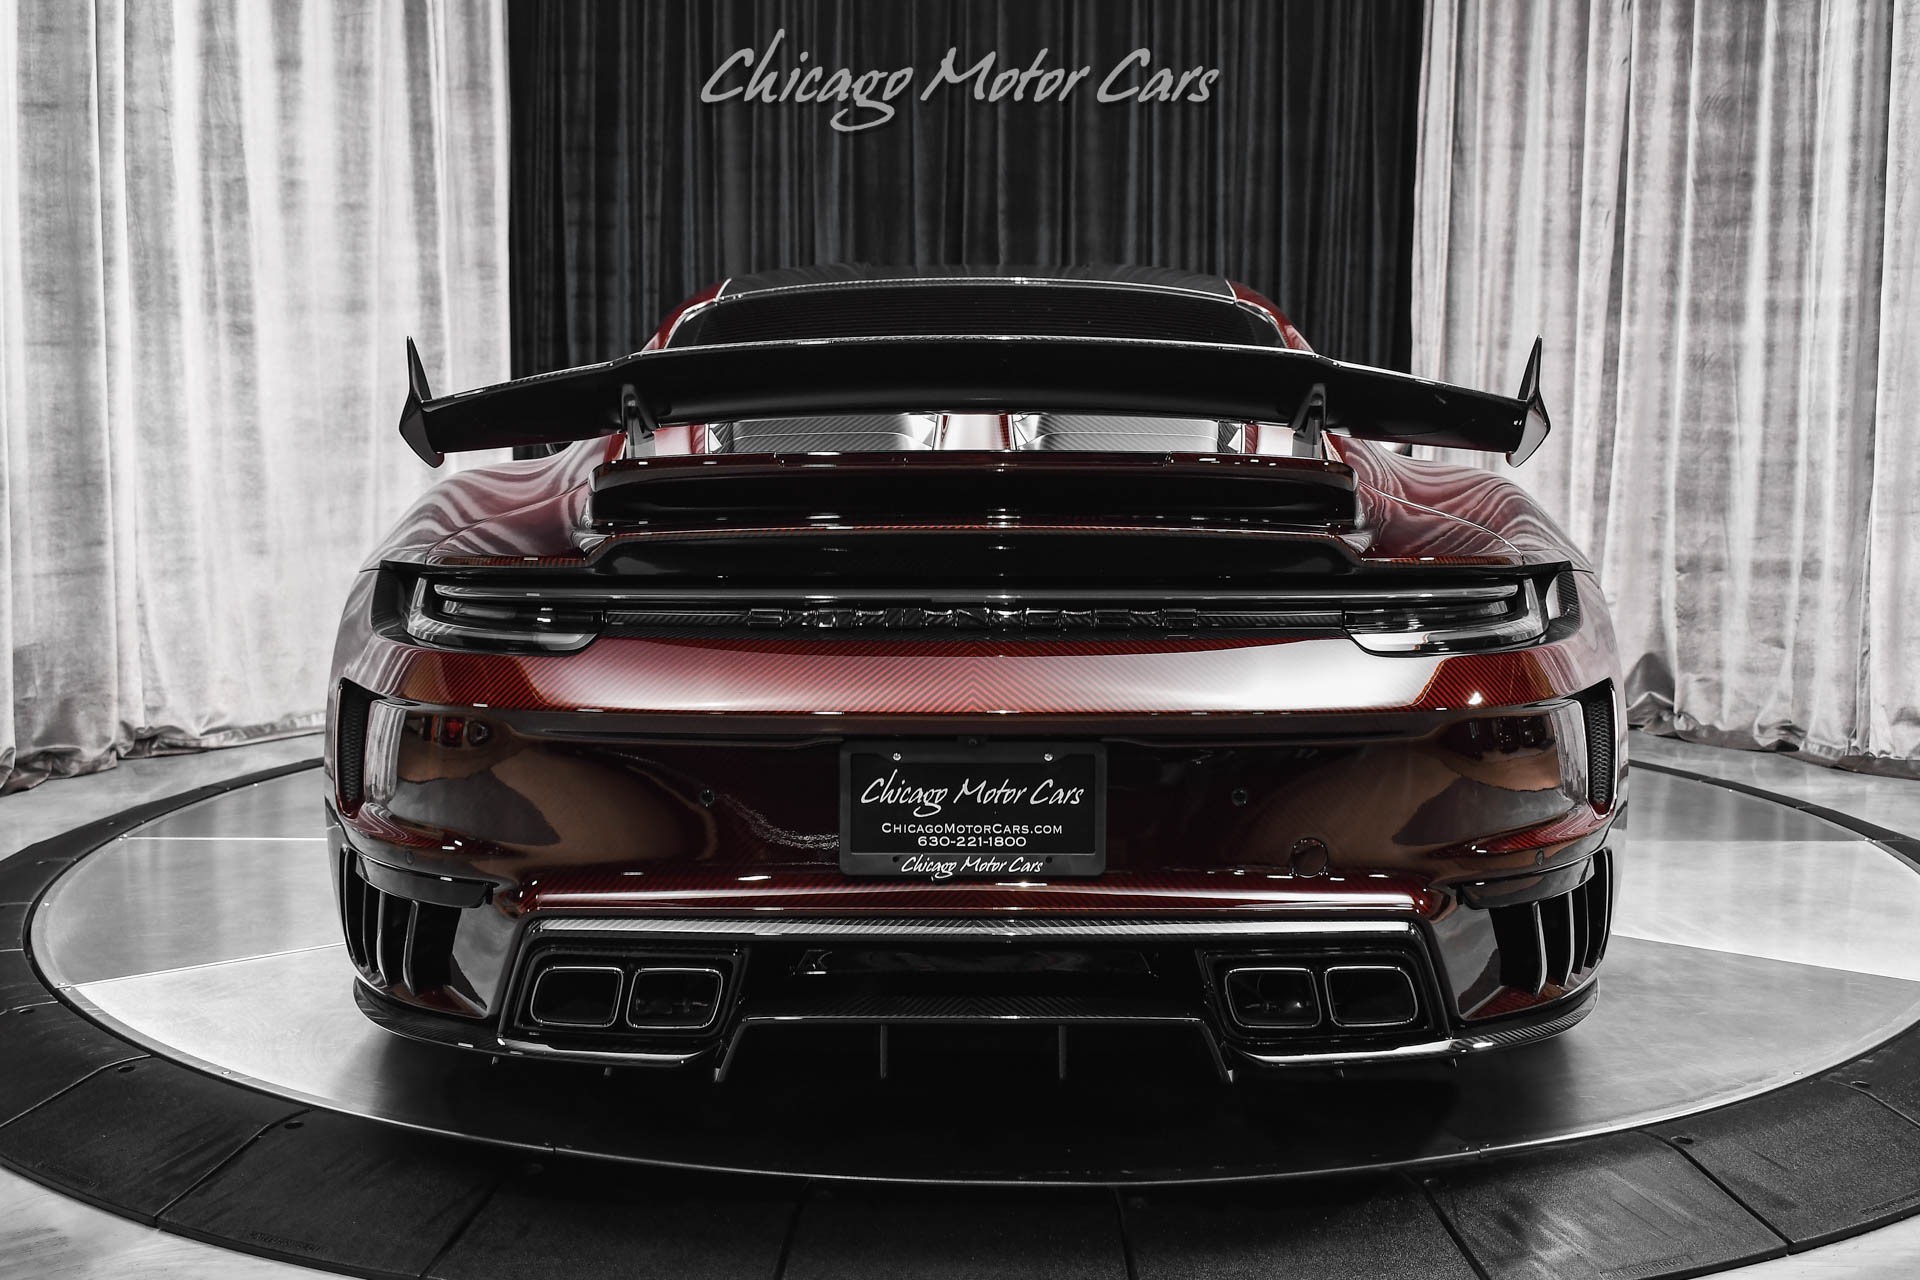 Used-2022-Porsche-911-Turbo-S-Coupe-Topcar-Stinger-EXPOSED-CARBON-Loaded-with-Upgrades-RARE